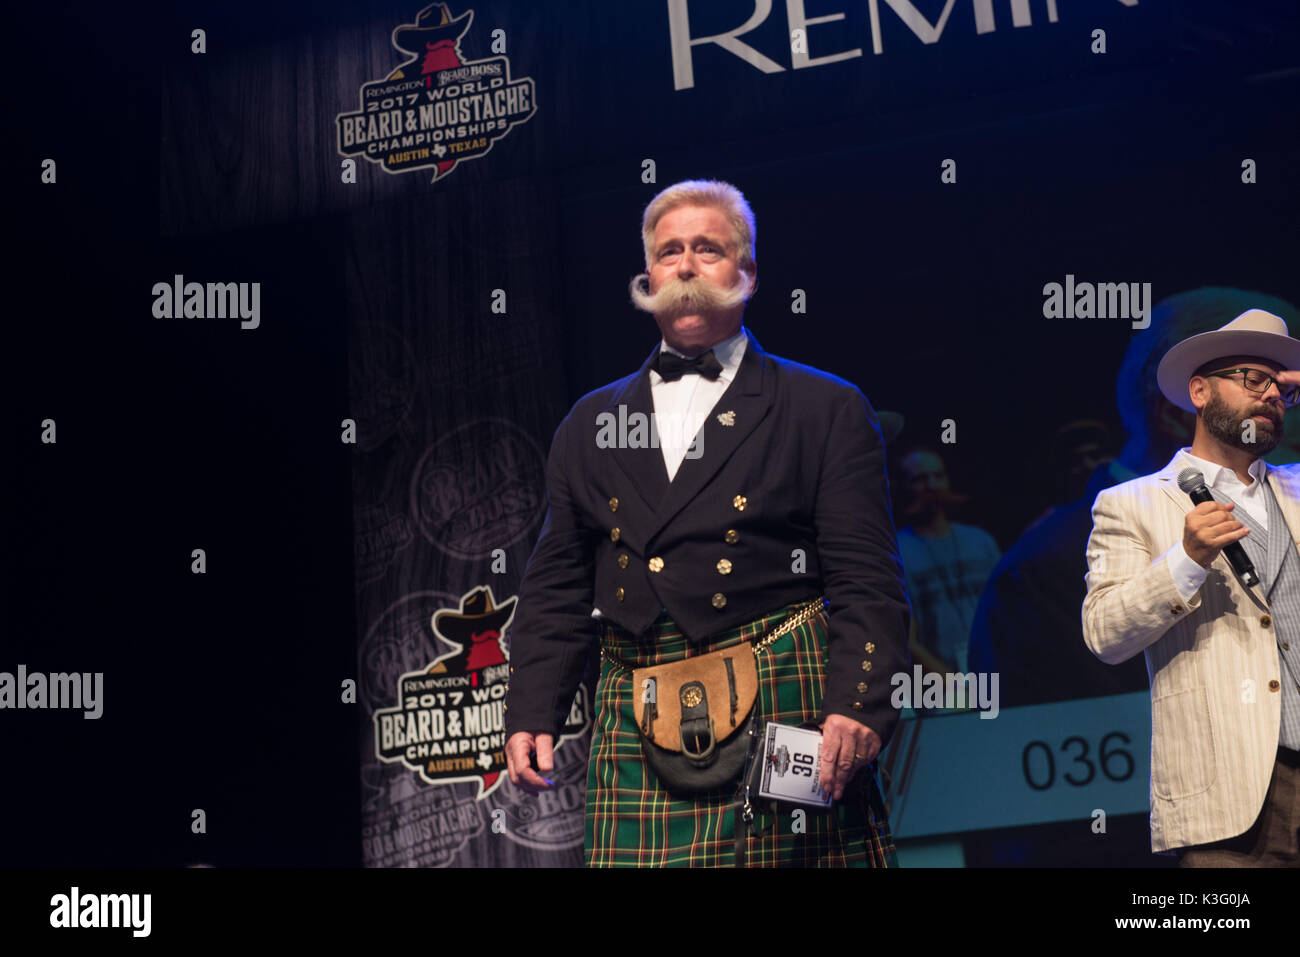 Austin, Texas, USA. 1st September, 2017. WOLFGANG SCHNEIDER poses for after winning the 2017 World Beard and Mustache Championships natural moustache catagory in Austin, Texas. More than a thousand competitiors and beard enthusiasts travelled to the event from all over for the world. 1st Sep, 2017. Credit: Sandy Carson/ZUMA Wire/Alamy Live News Stock Photo